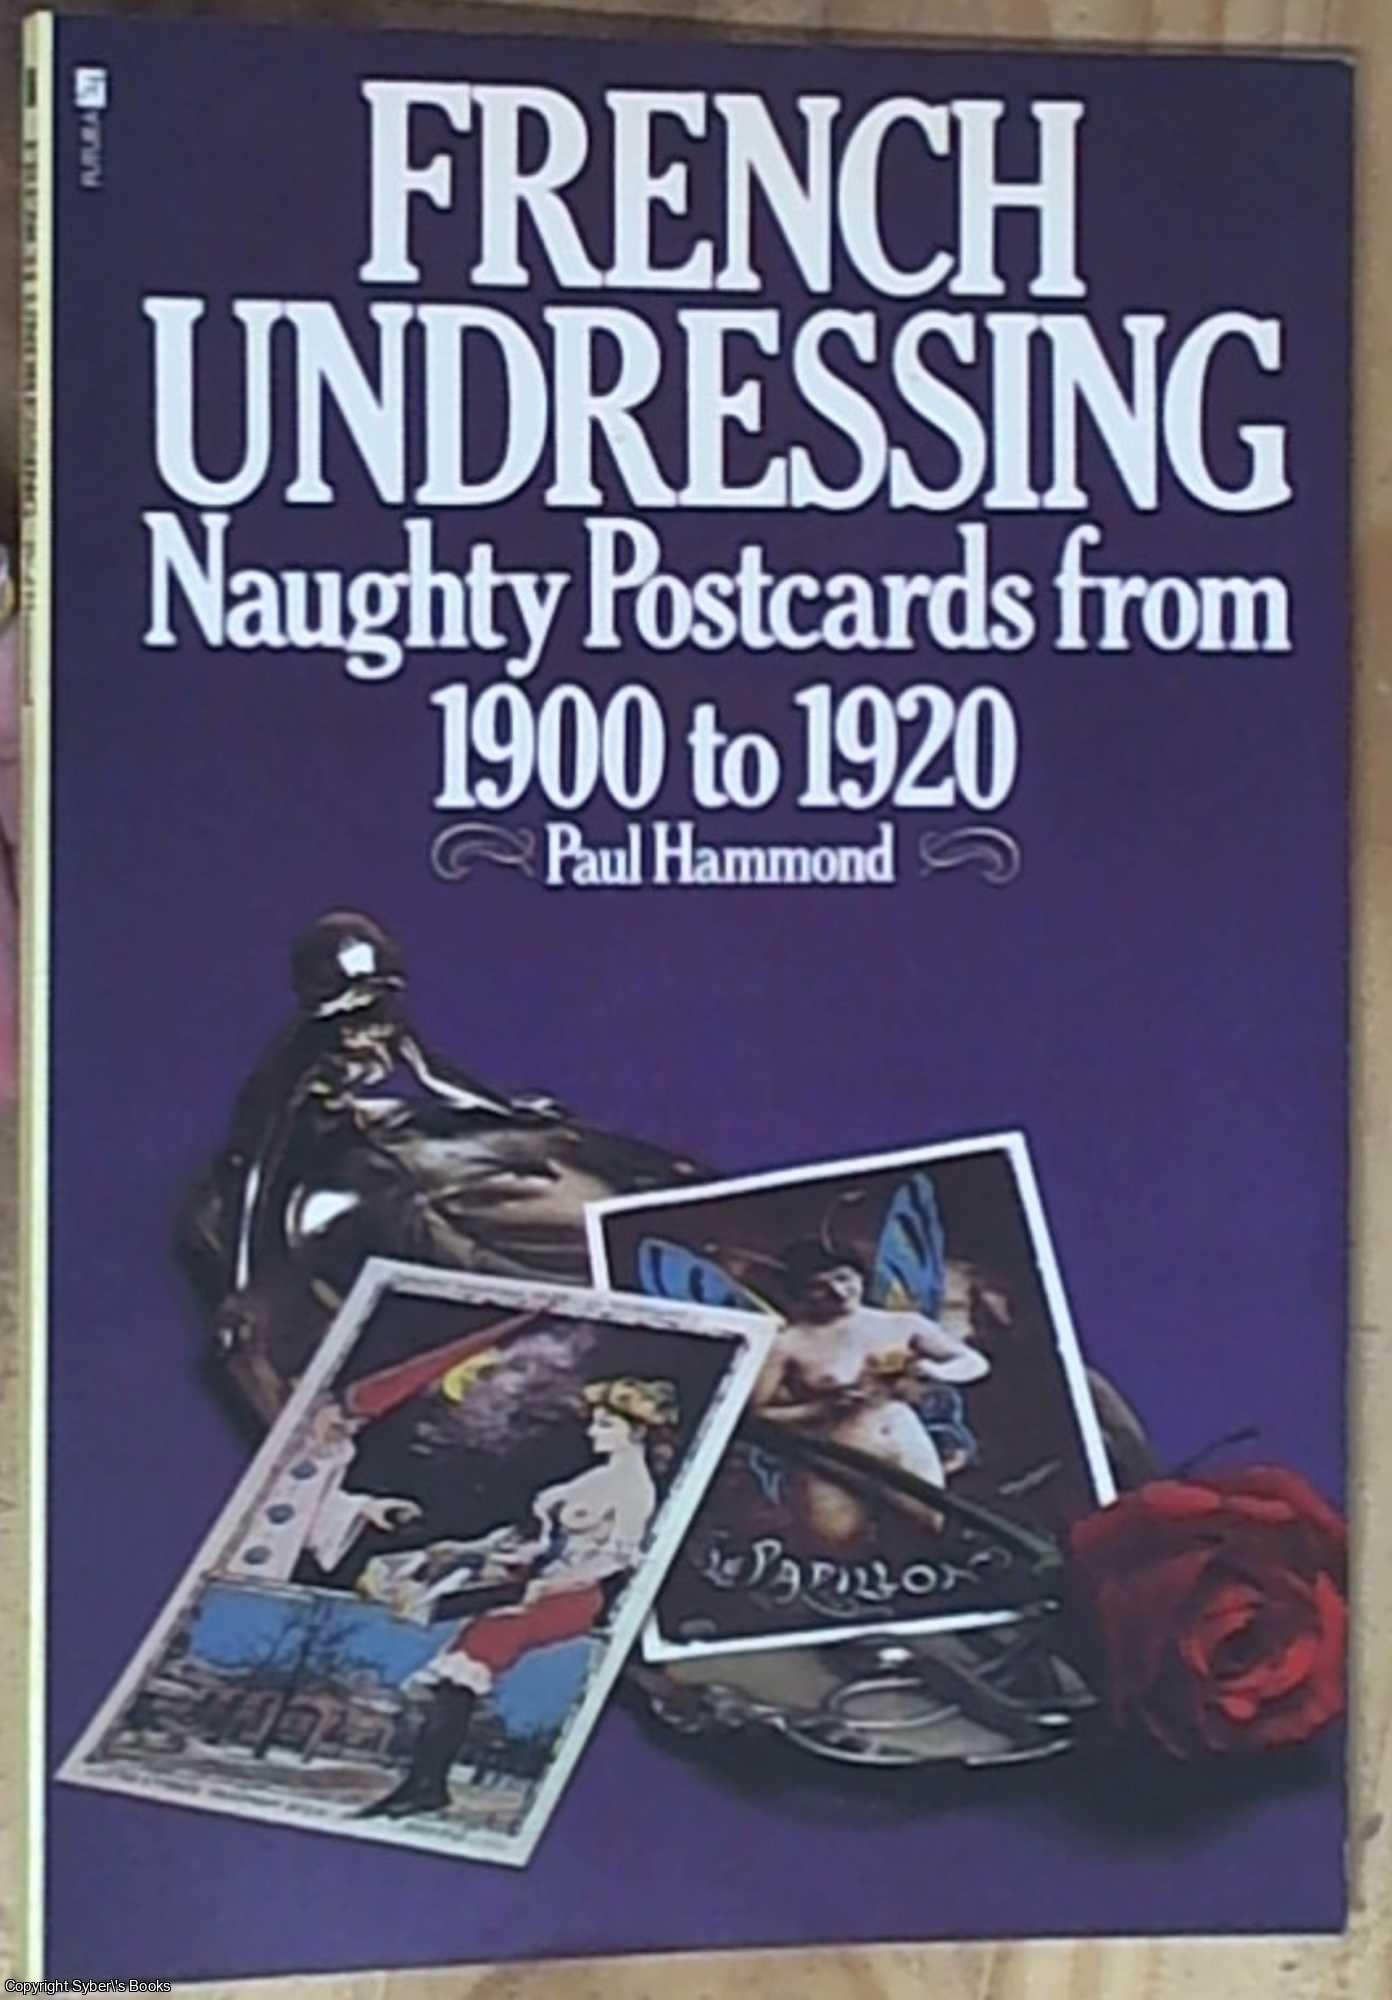 Hammond, Paul - French Undressing: Naughty Postcards From 1900 To 1920